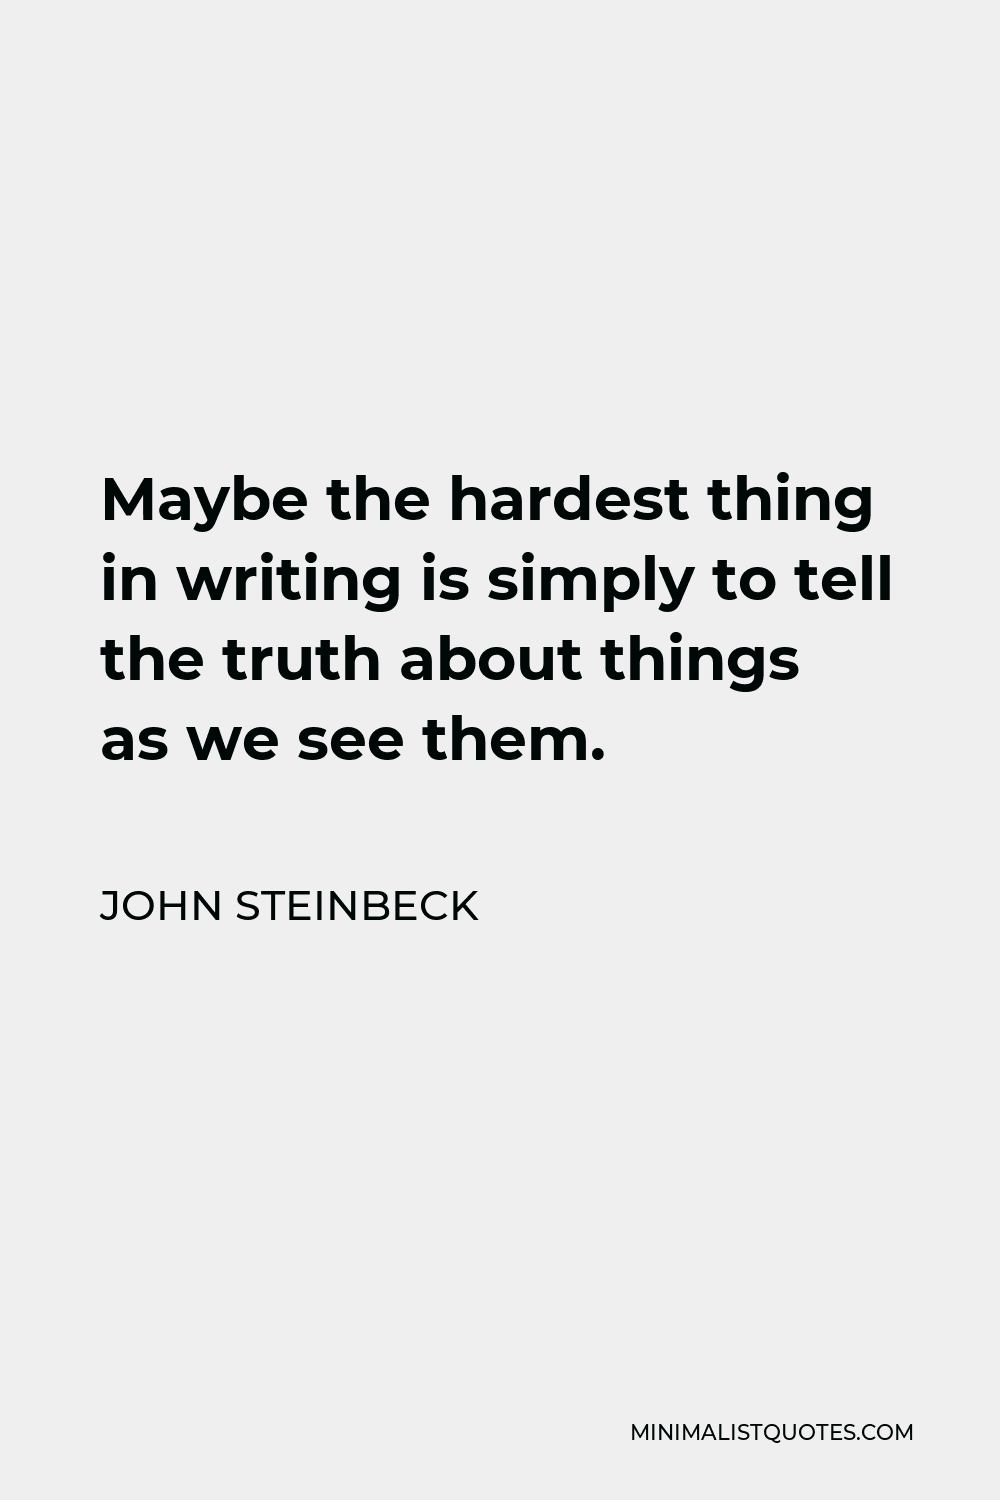 John Steinbeck Quote - Maybe the hardest thing in writing is simply to tell the truth about things as we see them.